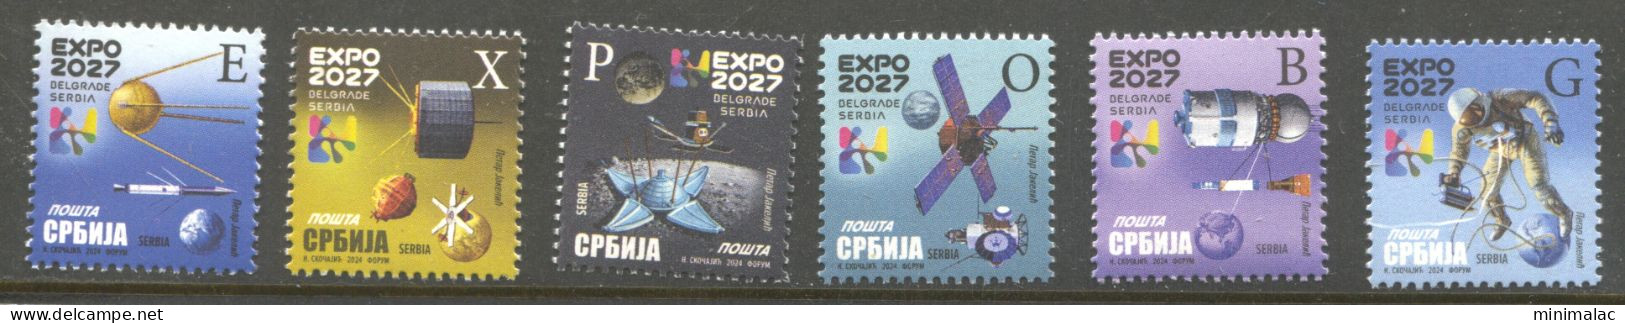 Serbia 2024, Definitive Postage Stamps Of The Republic Of Serbia 2024-2027, EXPO 2027, Space. Full Series 6 Pts, MNH - Serbia